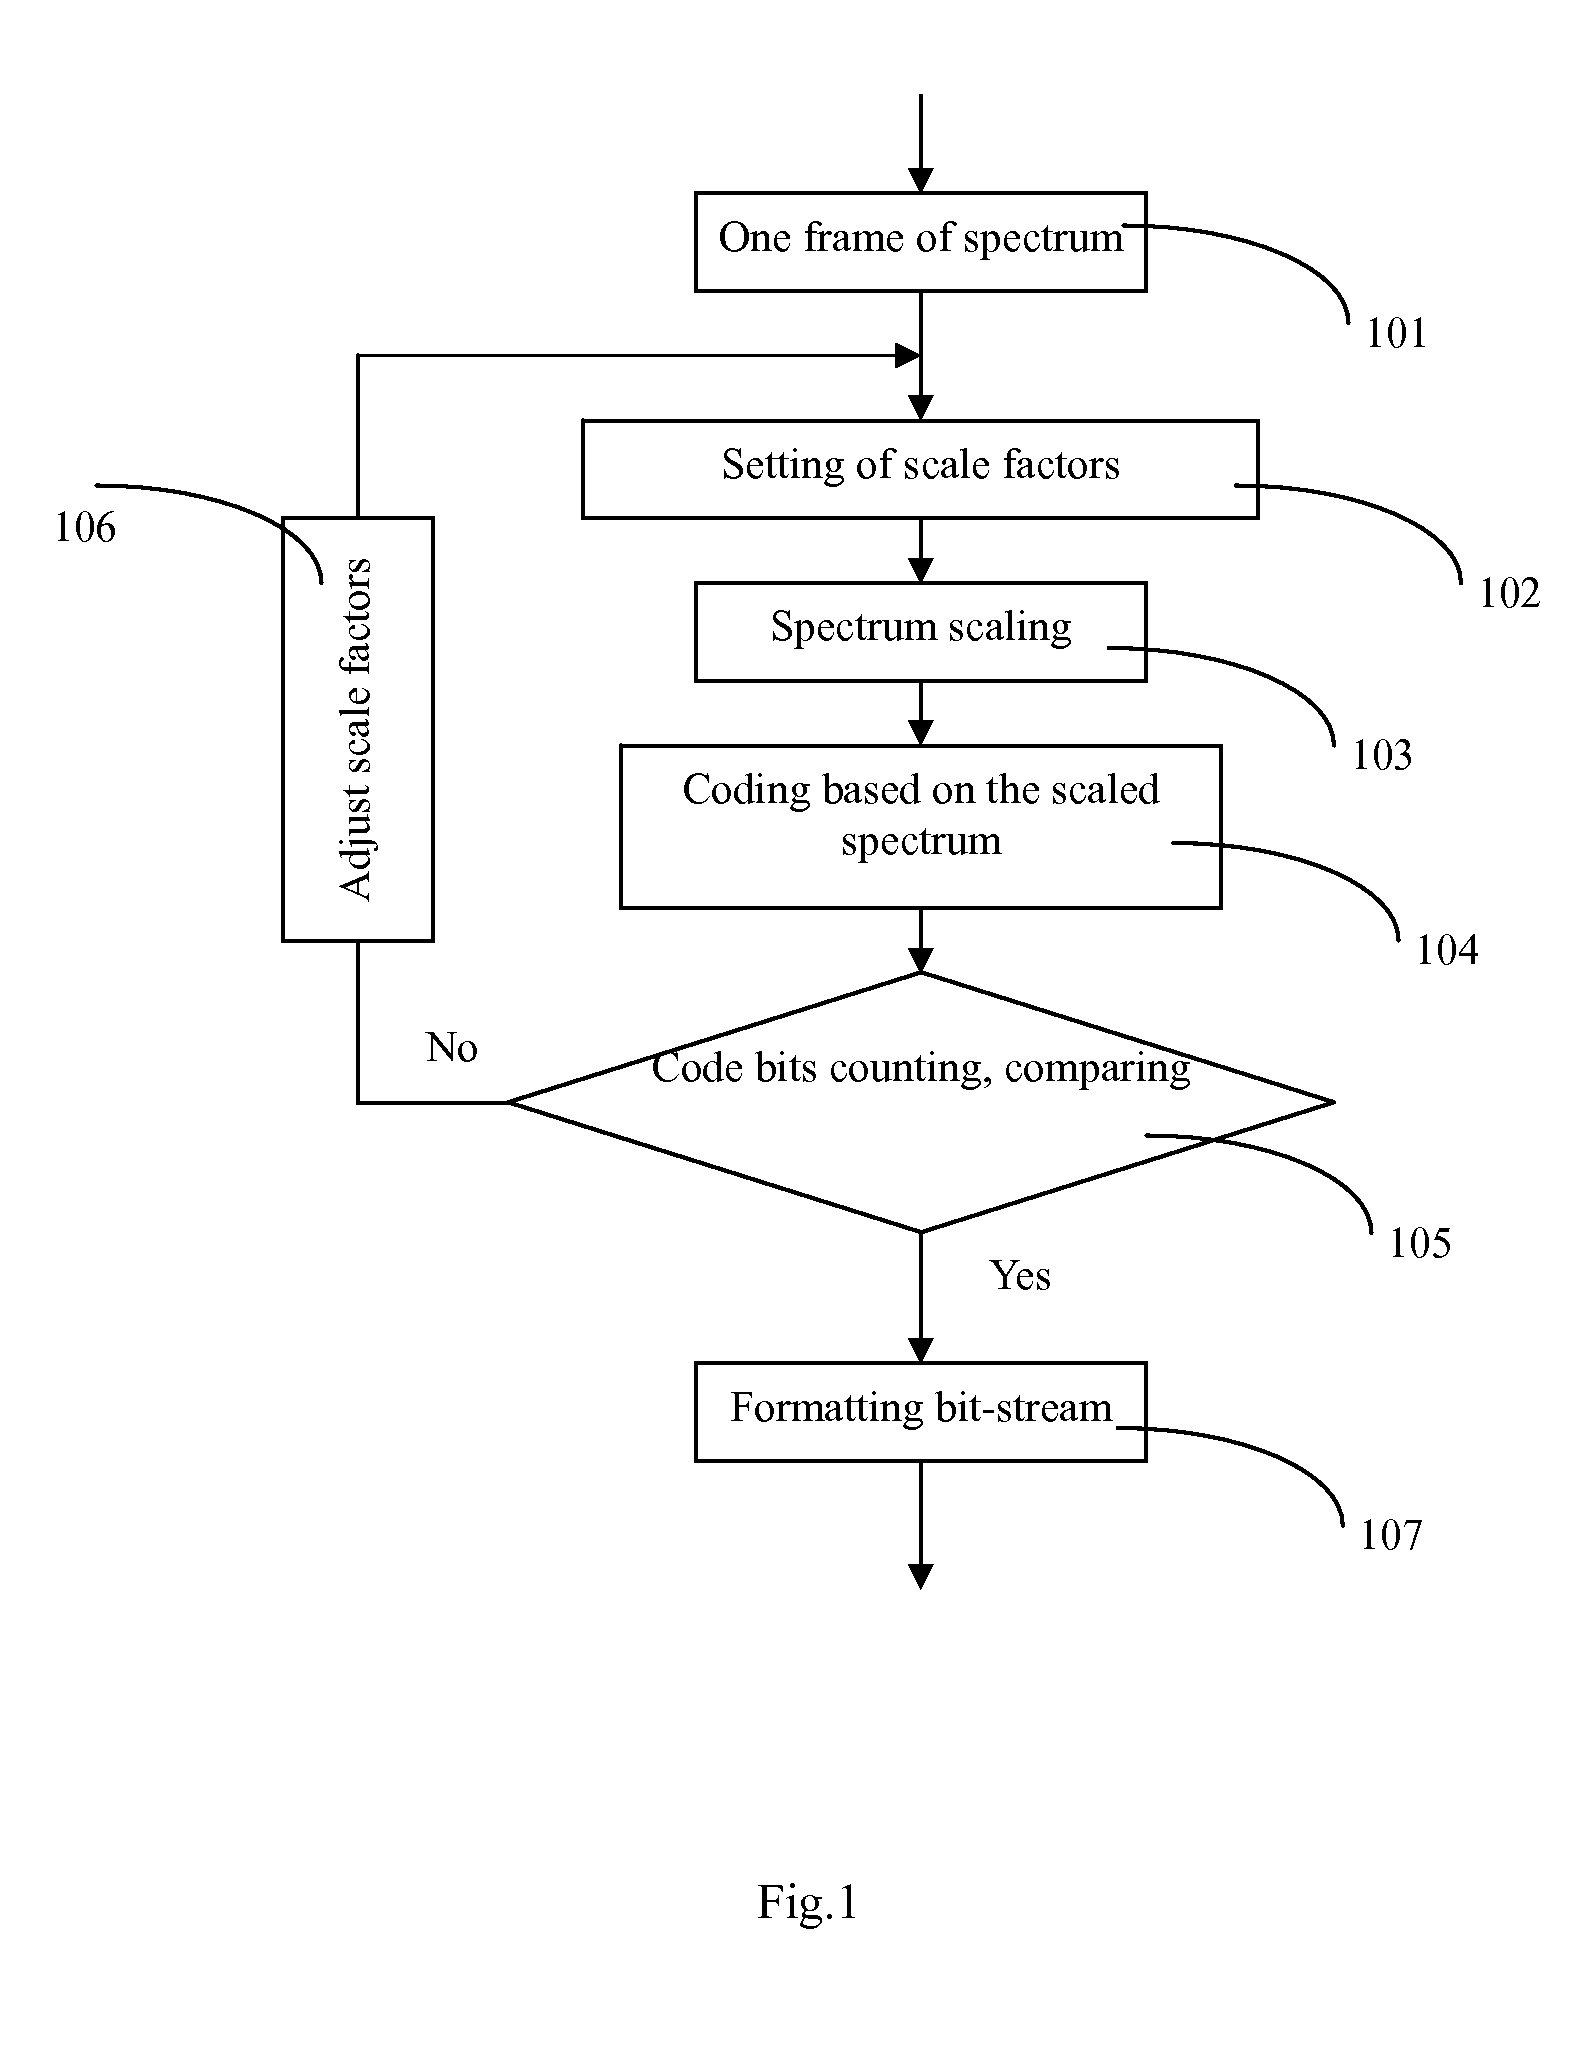 Method of bitrate control and adjustment for audio coding